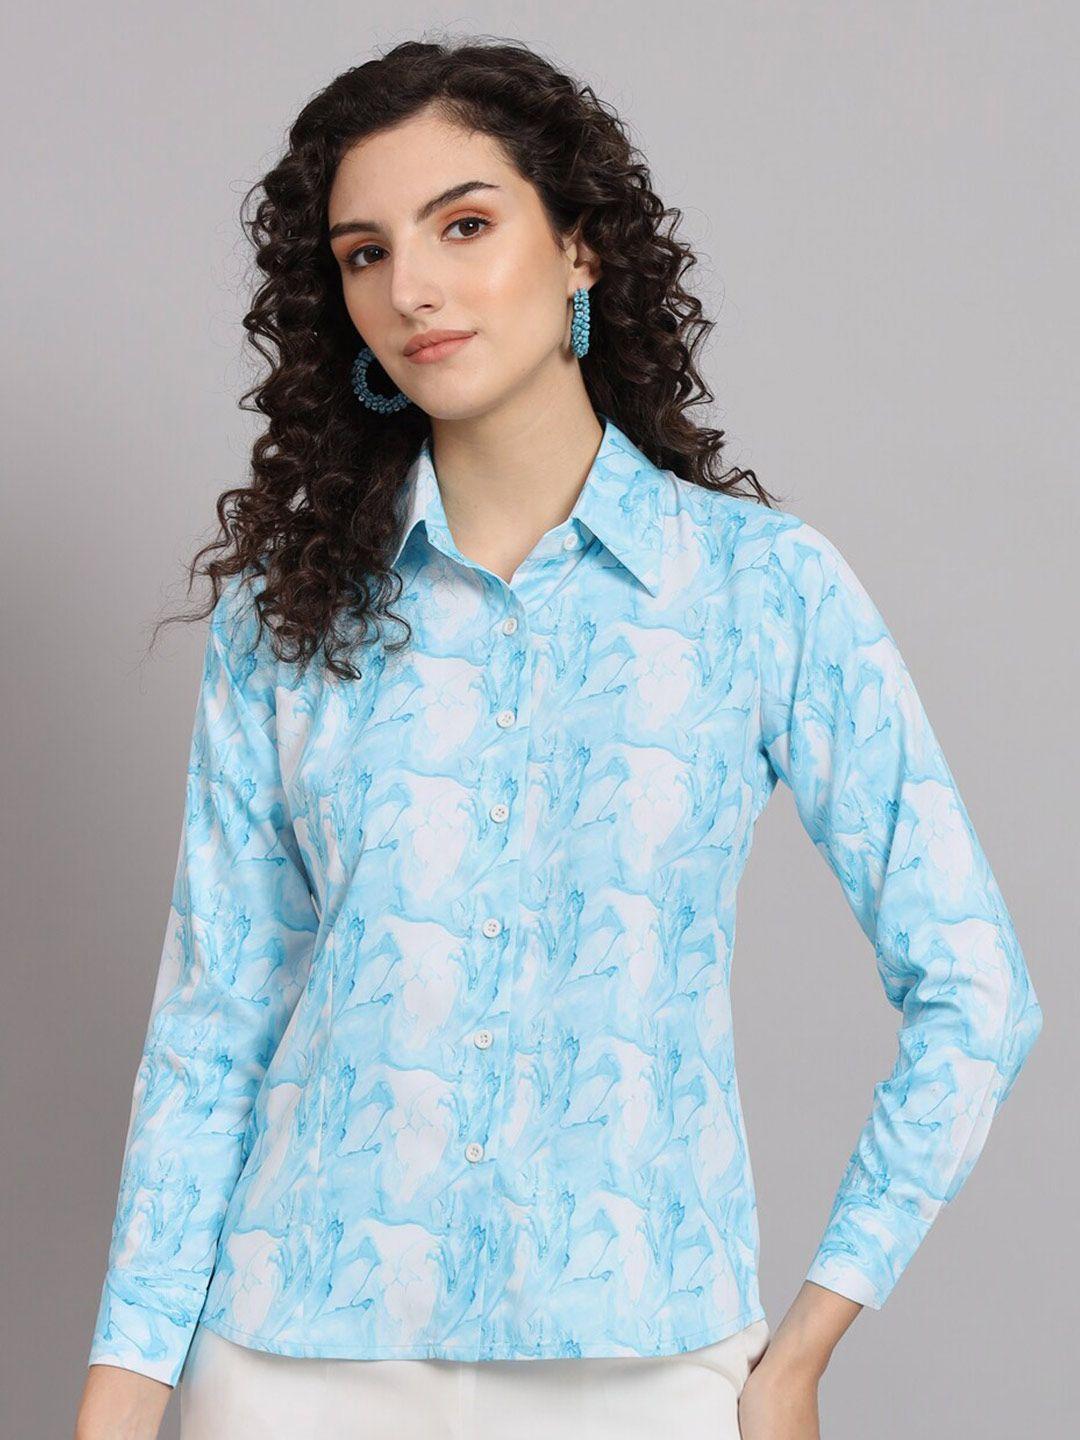 powersutra-comfort-abstract-printed-casual-shirt